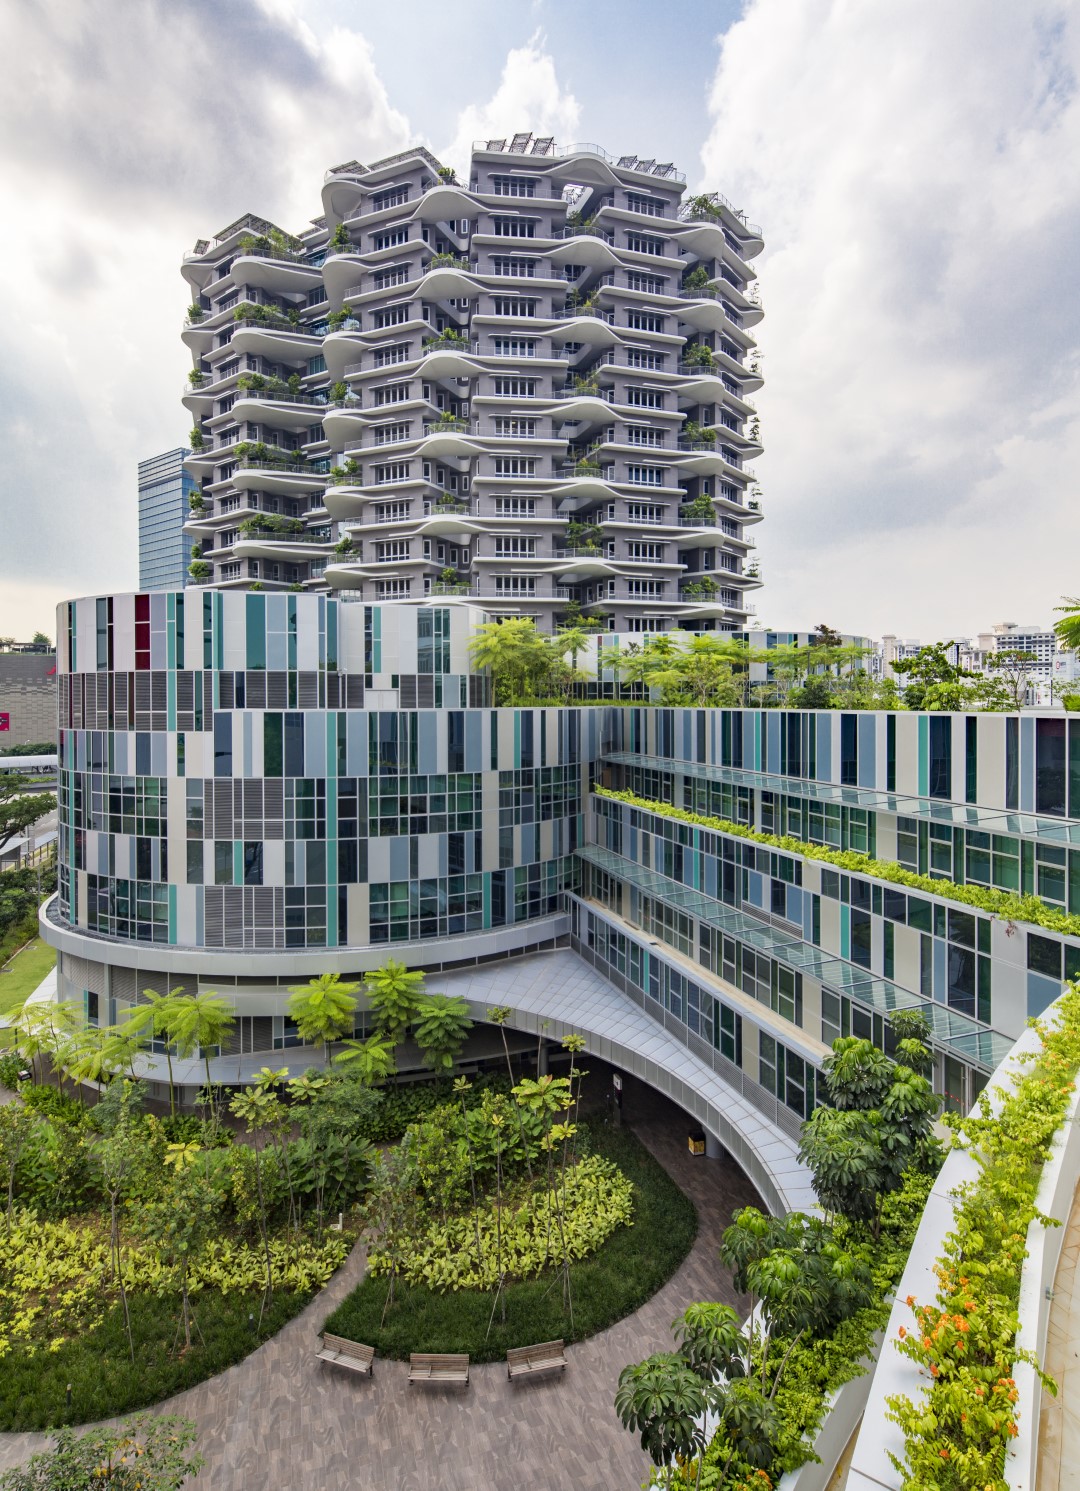 Ng Teng Fong Hospital, Singapore is connected to nearby shopping malls and facilities, enhancing its value and connectivity